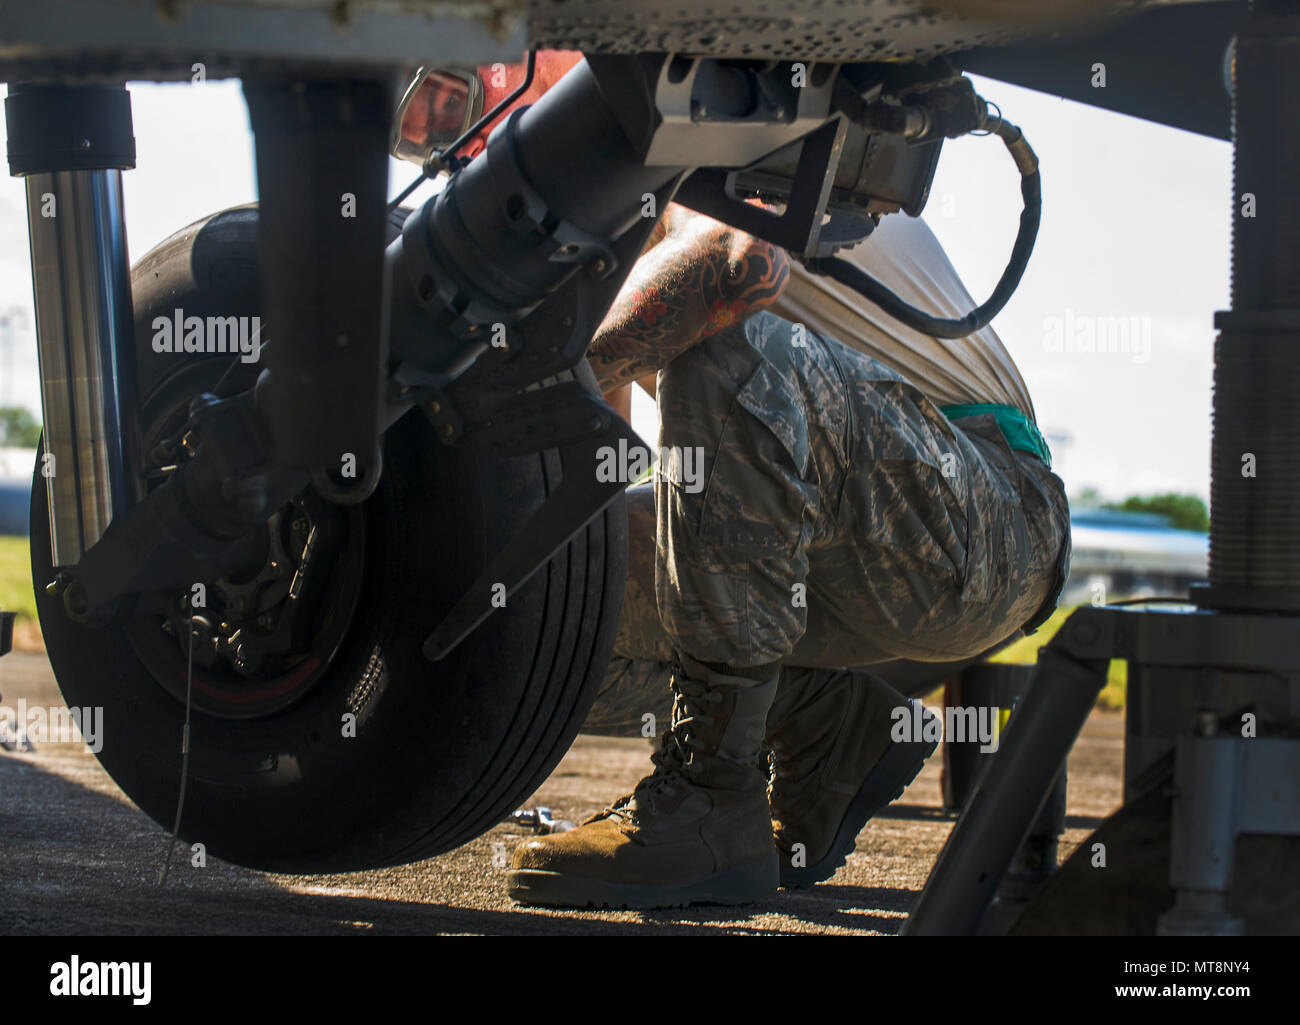 U.S. Air Force Airman 1st Class Joshua Letona, 33d Rescue Maintenance Squadron crew chief out of Kadena Air Base, Japan, and native of Long Beach, California, replaces a tire on the landing gear of an HH-60 Pave Hawk assigned to the 33d Rescue Squadron out of Kadena Air Base, Japan, during Exercise Balikatan, at Clark Air Base, Philippines, May 16, 2018. The HH-60's landing gear needed routine maintenance after returning from a mission during Exercise Balikatan. Exercise Balikatan, in its 34th iteration, is an annual U.S.-Philippine military training exercise focused on a variety of missions,  Stock Photo